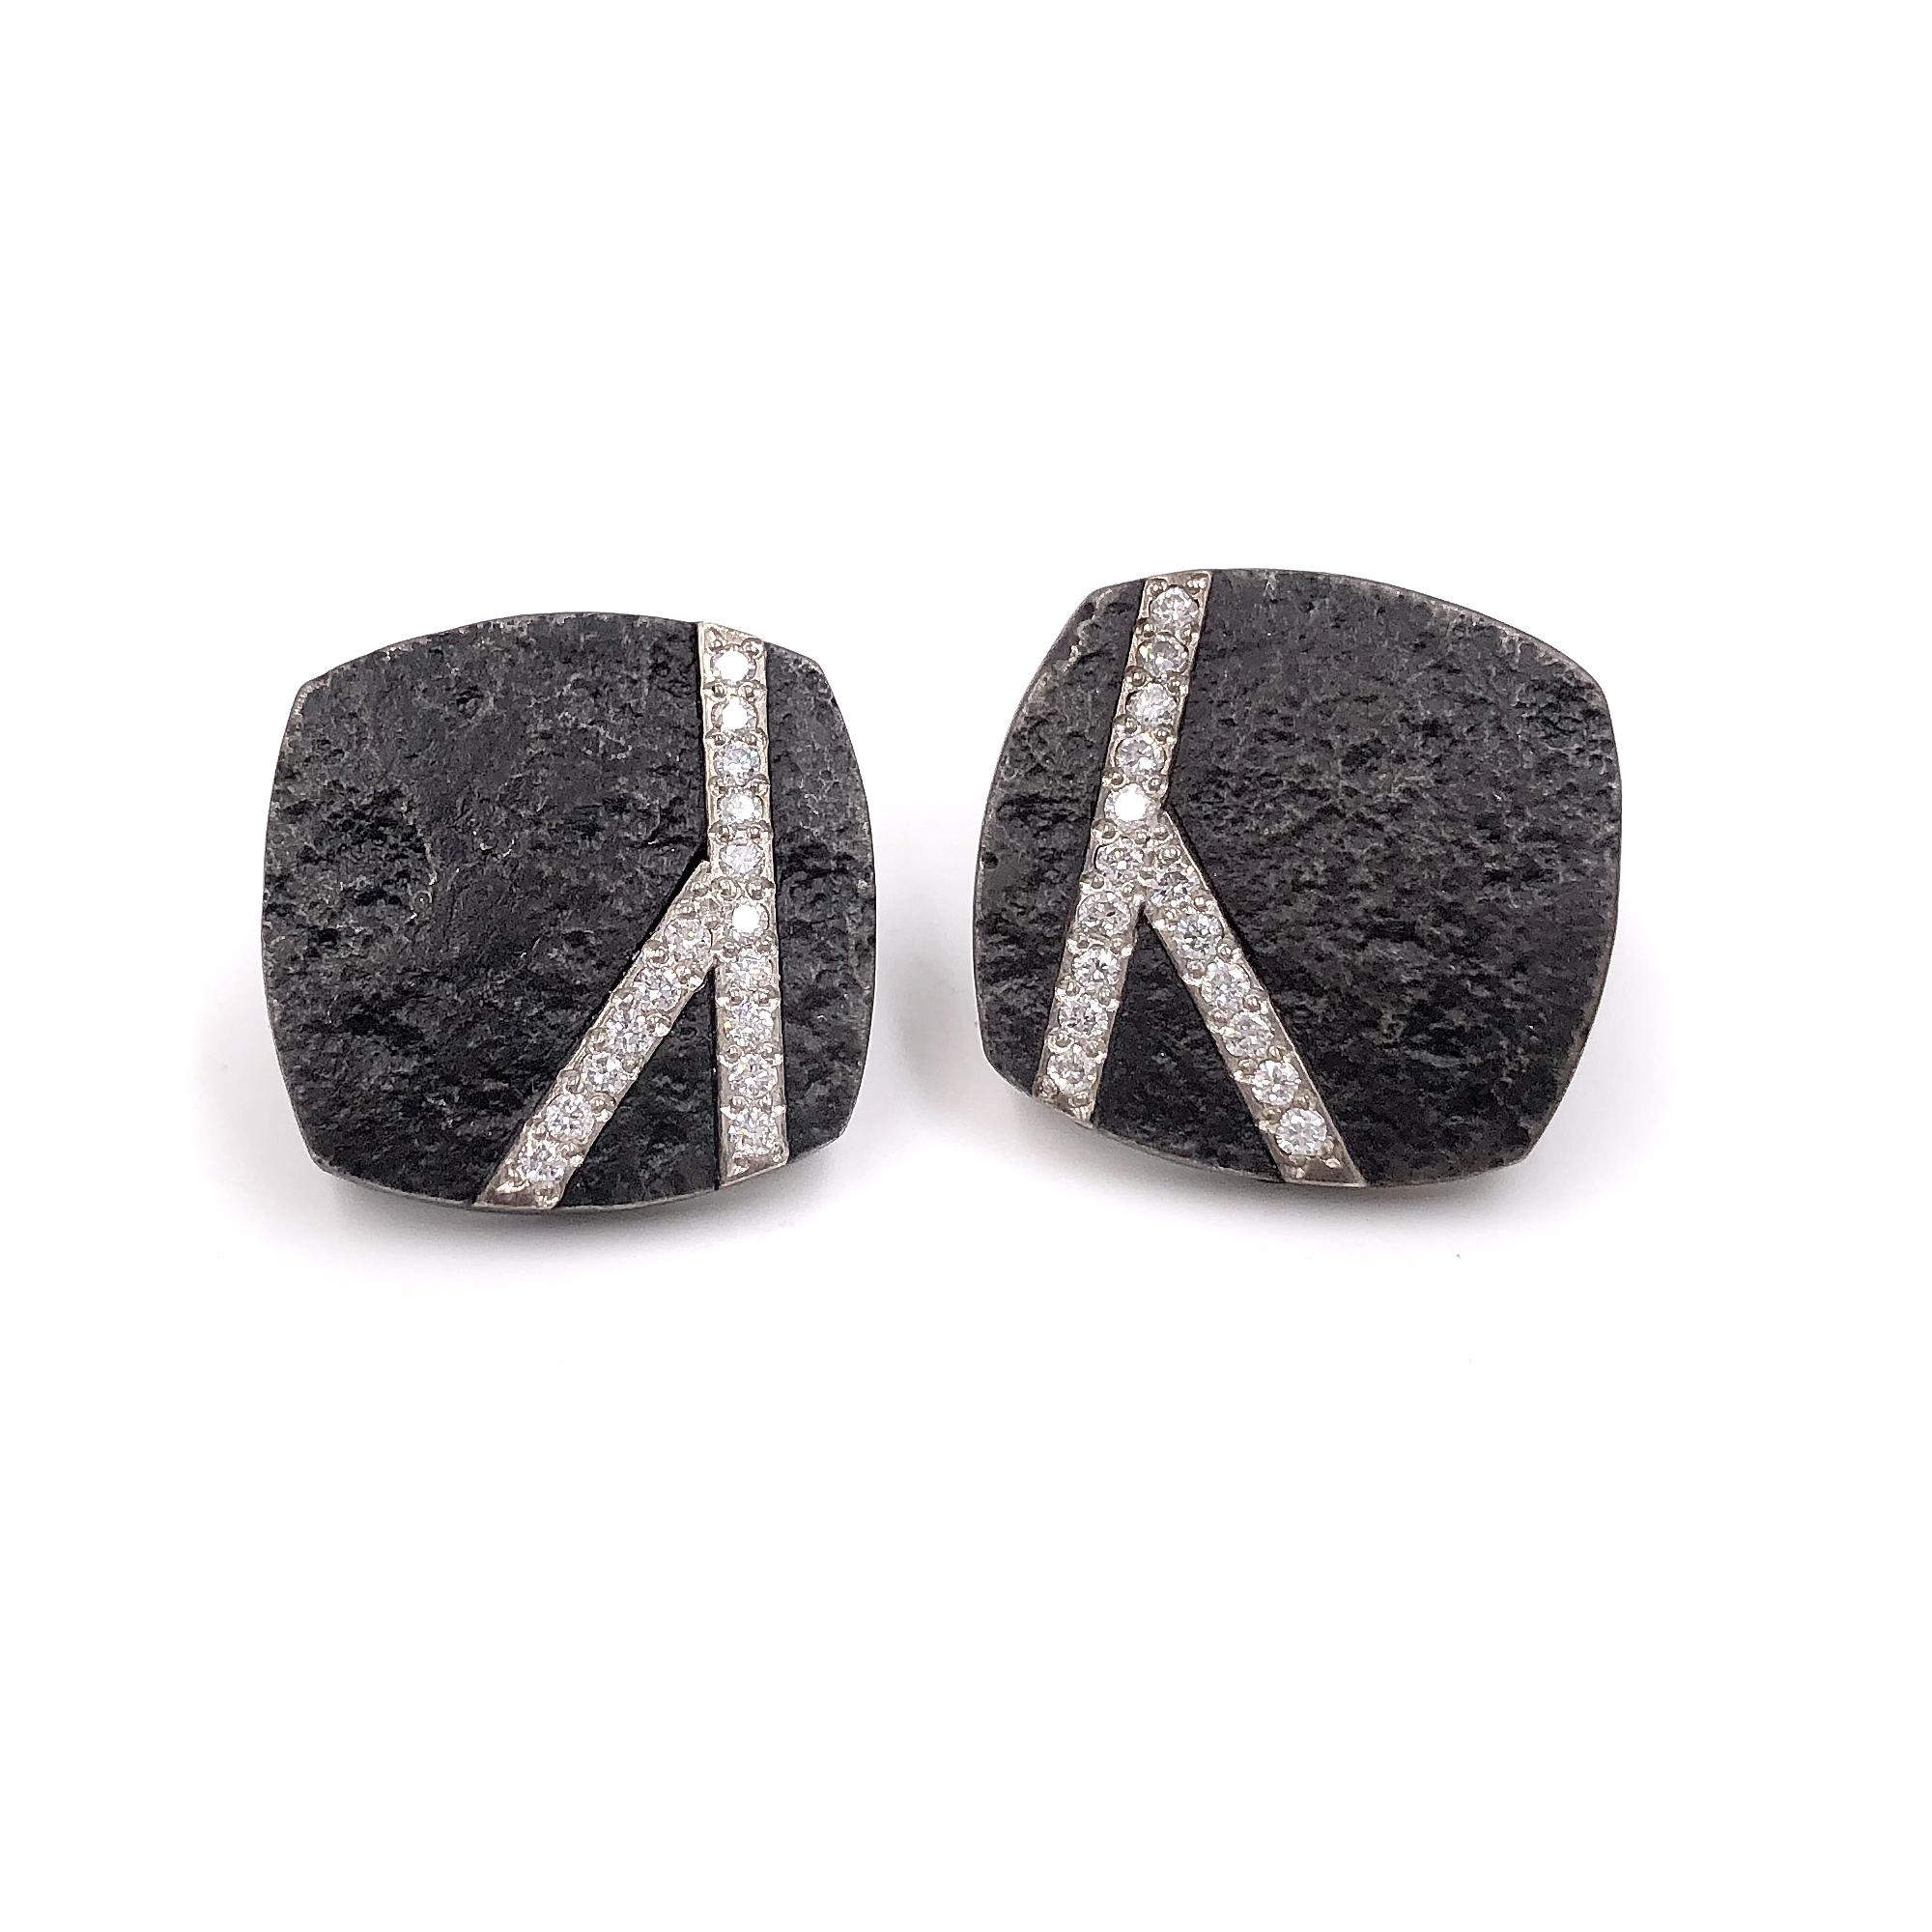 Small Carbon Cubed Earrings by award-winning jewelry artist Jaclyn Davidson hand-forged in weathered carbon steel featuring 18k white gold strips embedded with round brilliant-cut white diamonds (F/vs1). Earrings set on stamped 14k yellow gold posts